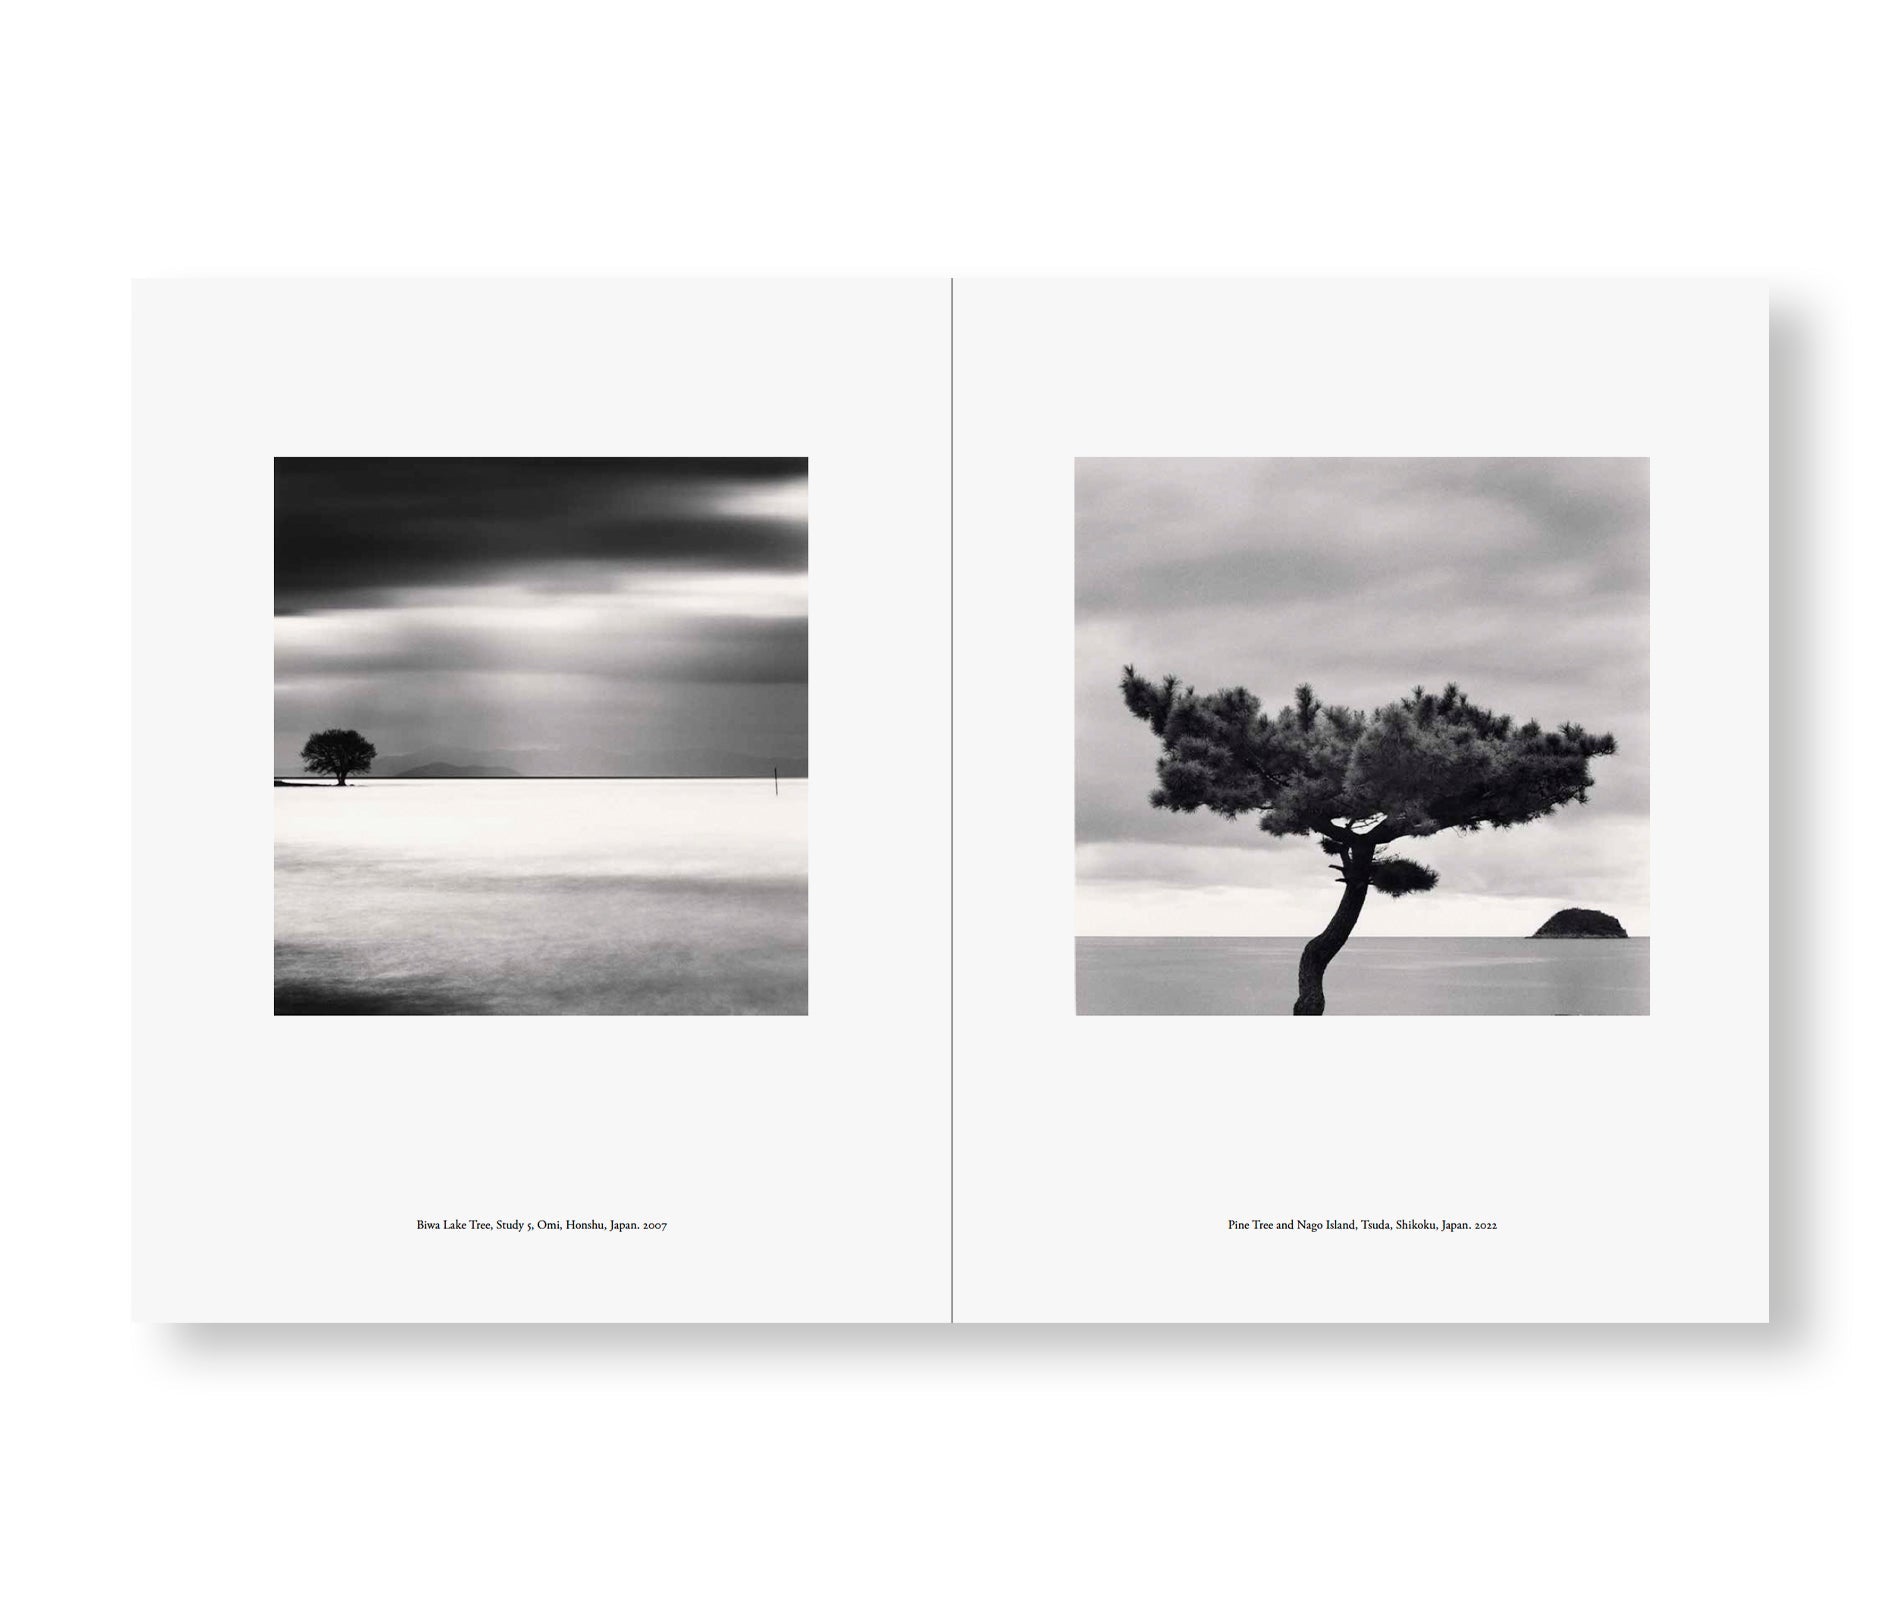 JAPAN | A LOVE STORY by Michael Kenna [SALE]